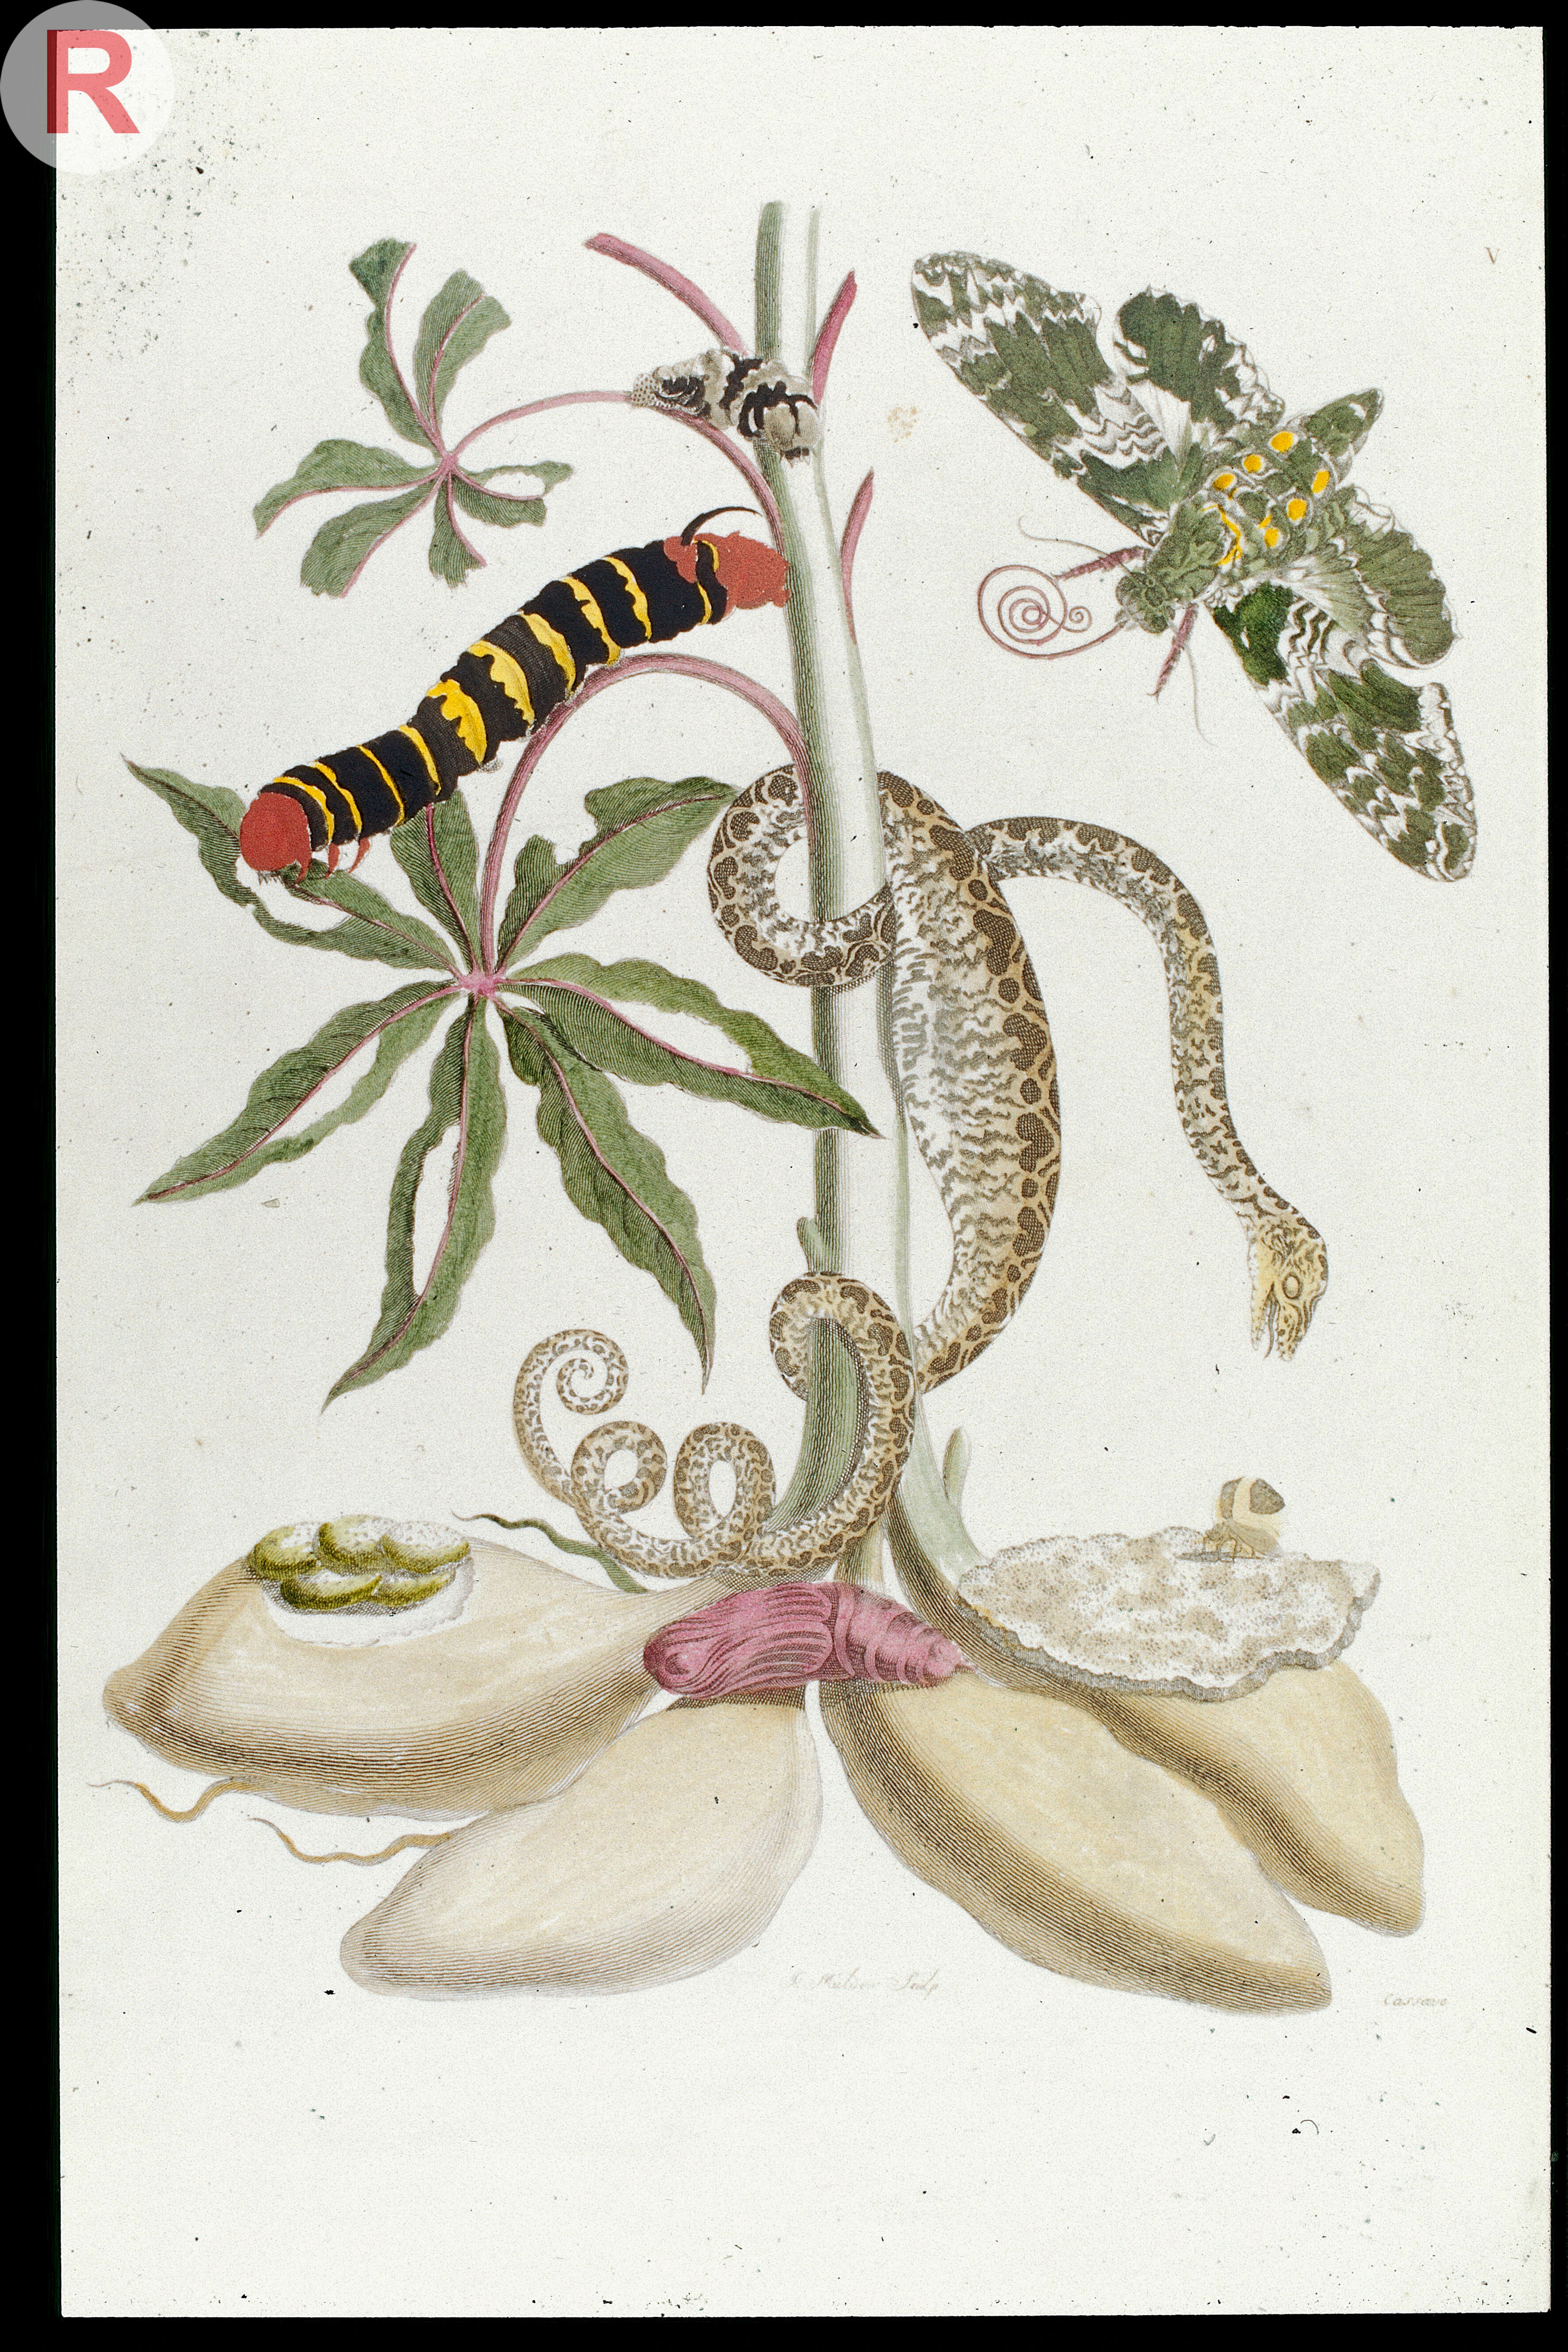 Botanical drawing of cassava surrounded by caterpillars and other insects.